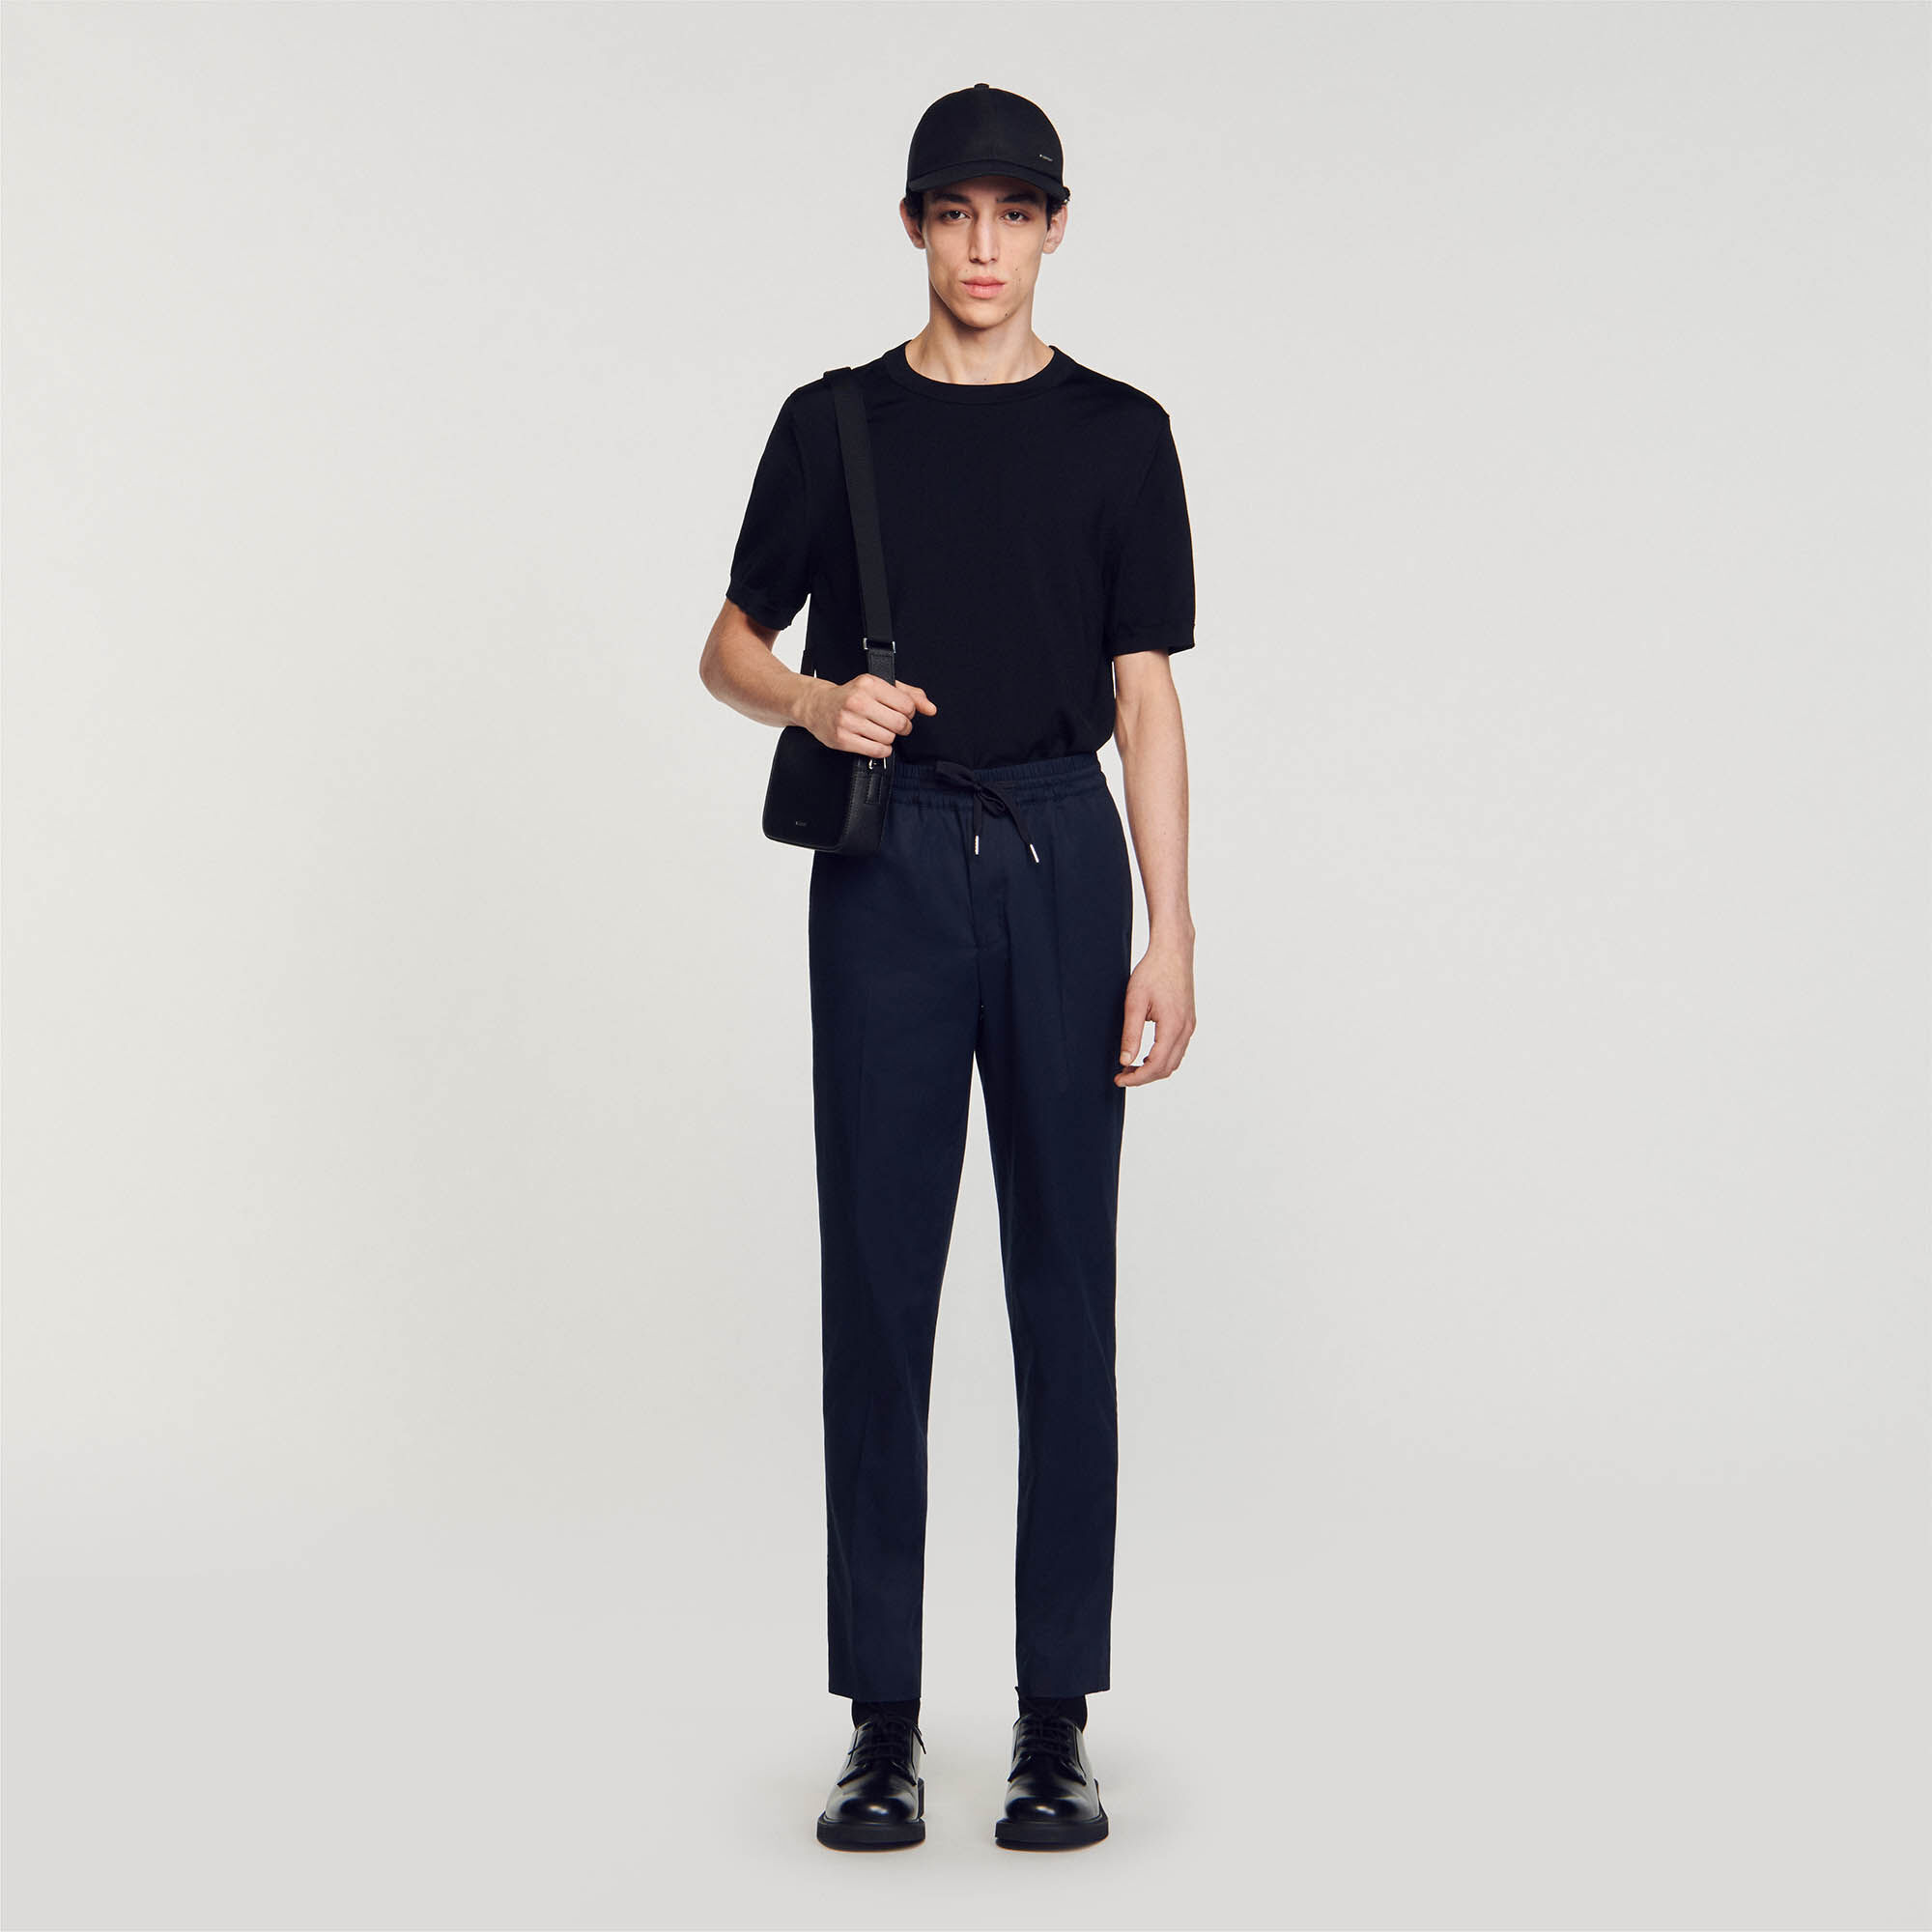 Are these the perfect pants? | Men's Clothing Forums